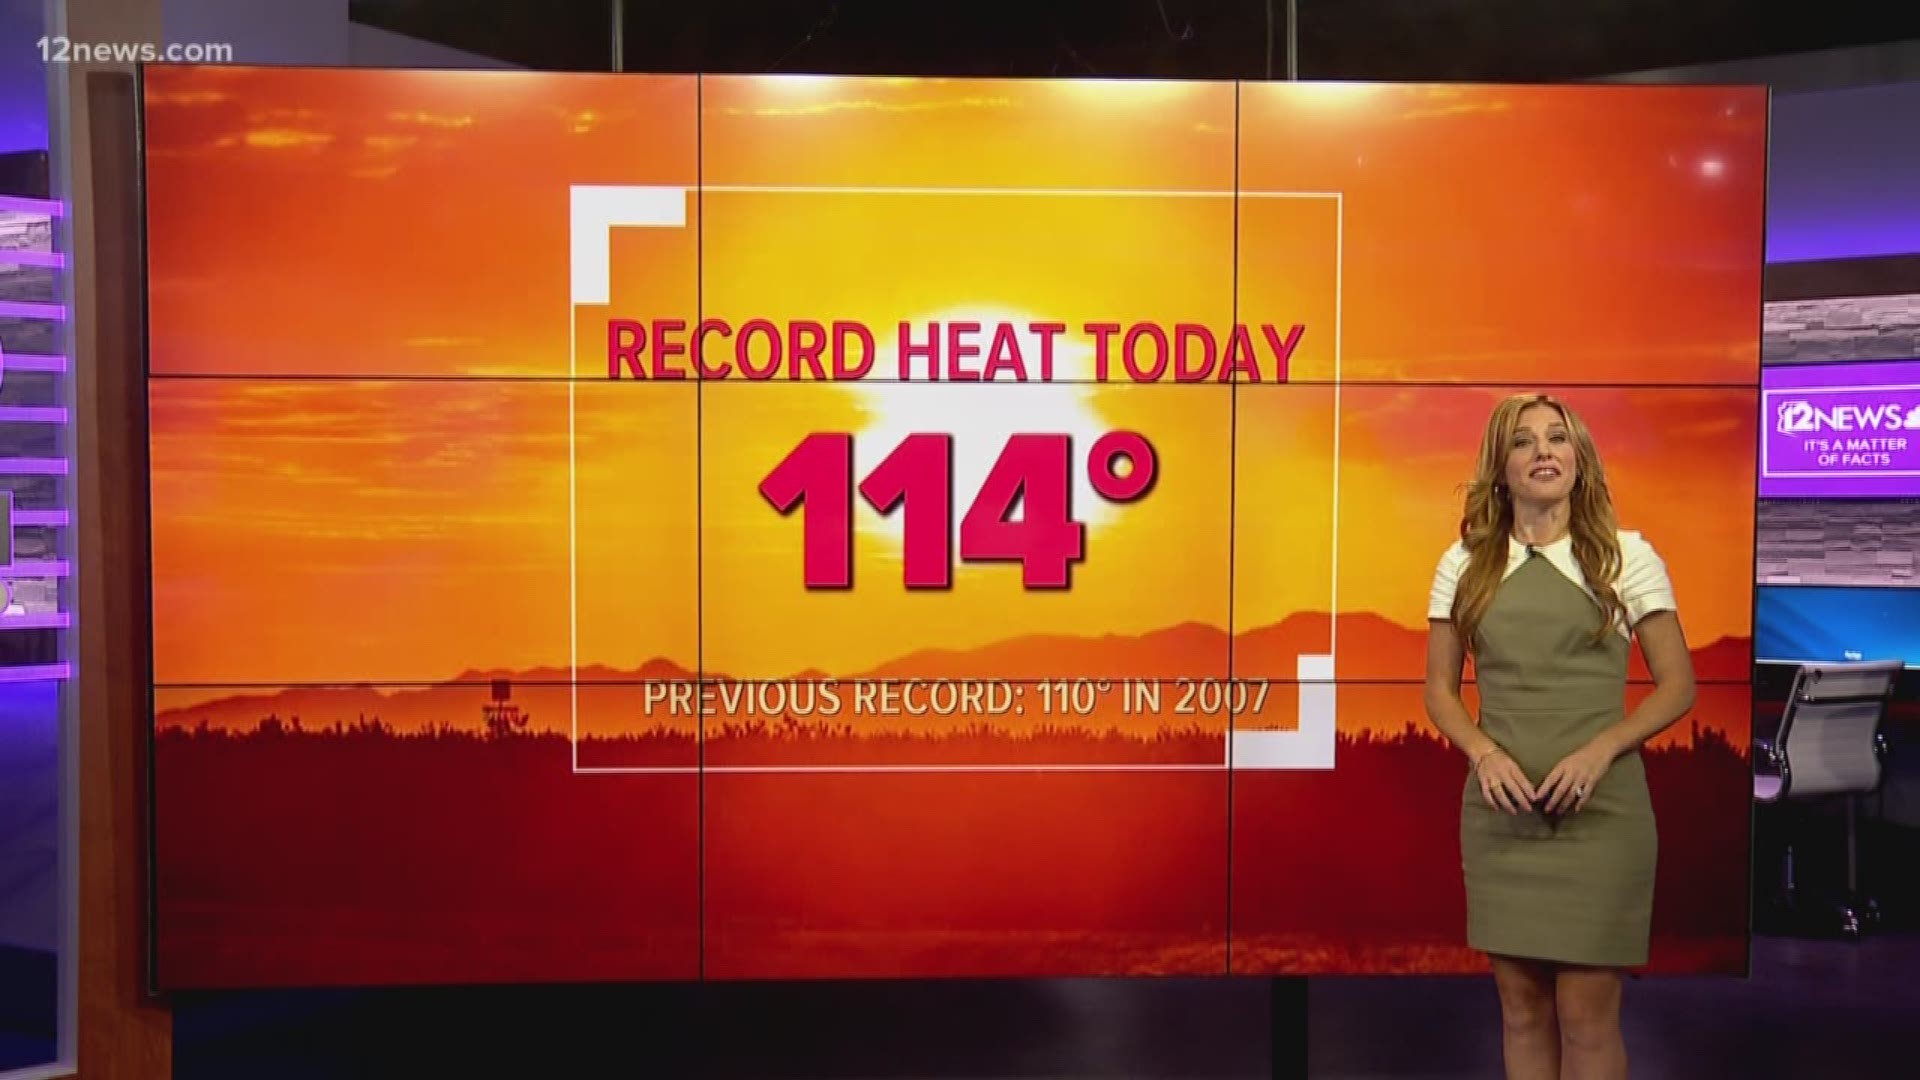 The numbers don't lie, and today the numbers showed record-breaking heat for the Valley and across Arizona for the second day in a row. Today we hit 114 degrees, breaking the old record of 110 degrees by a lot!